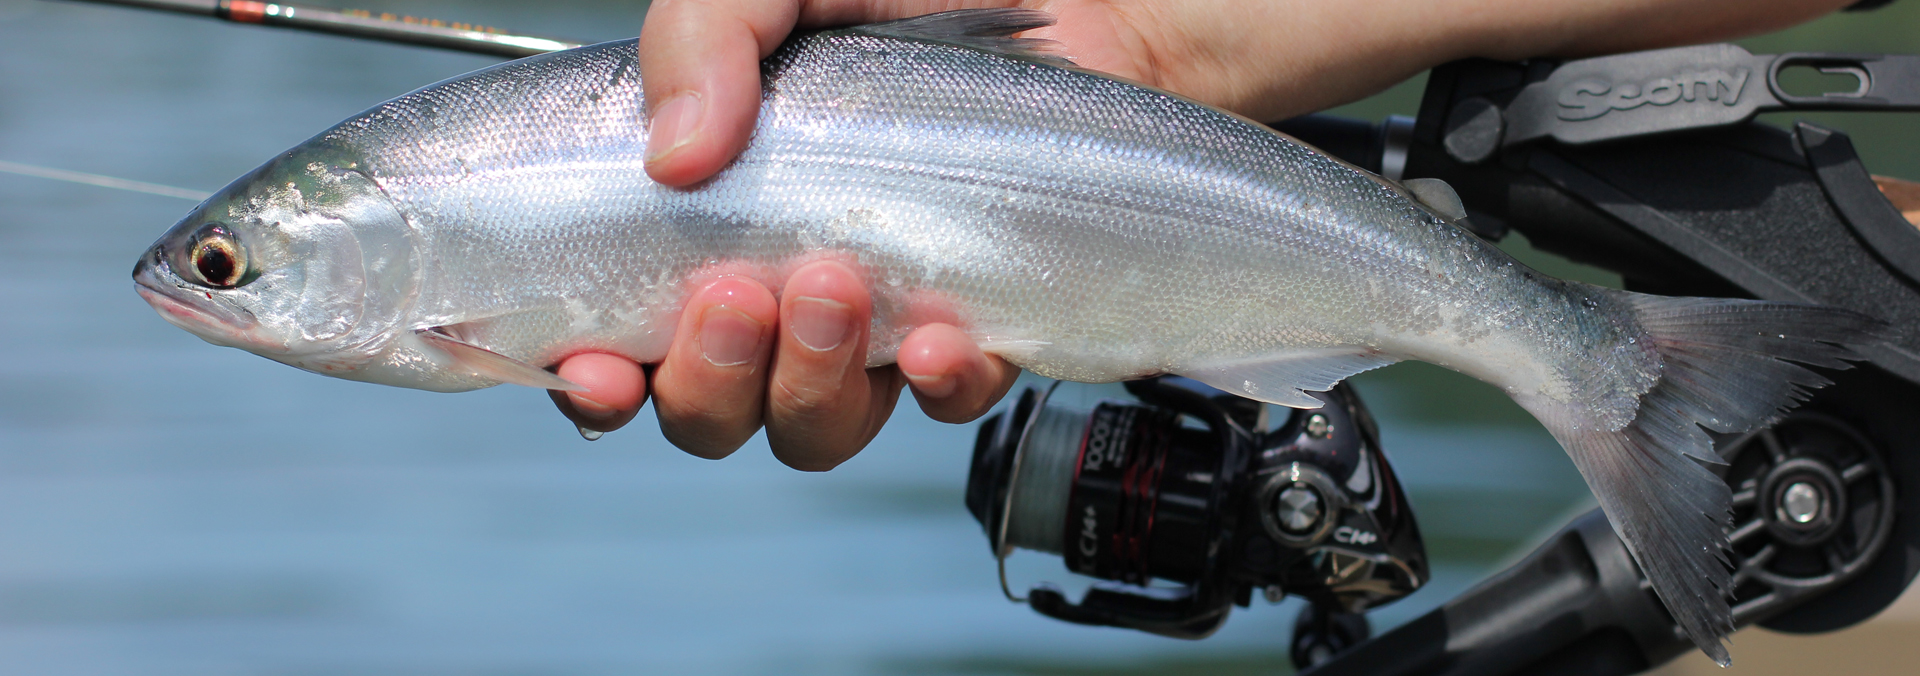 A Guide to Trolling for Kokanee Salmon in Lakes - Go Fish BC